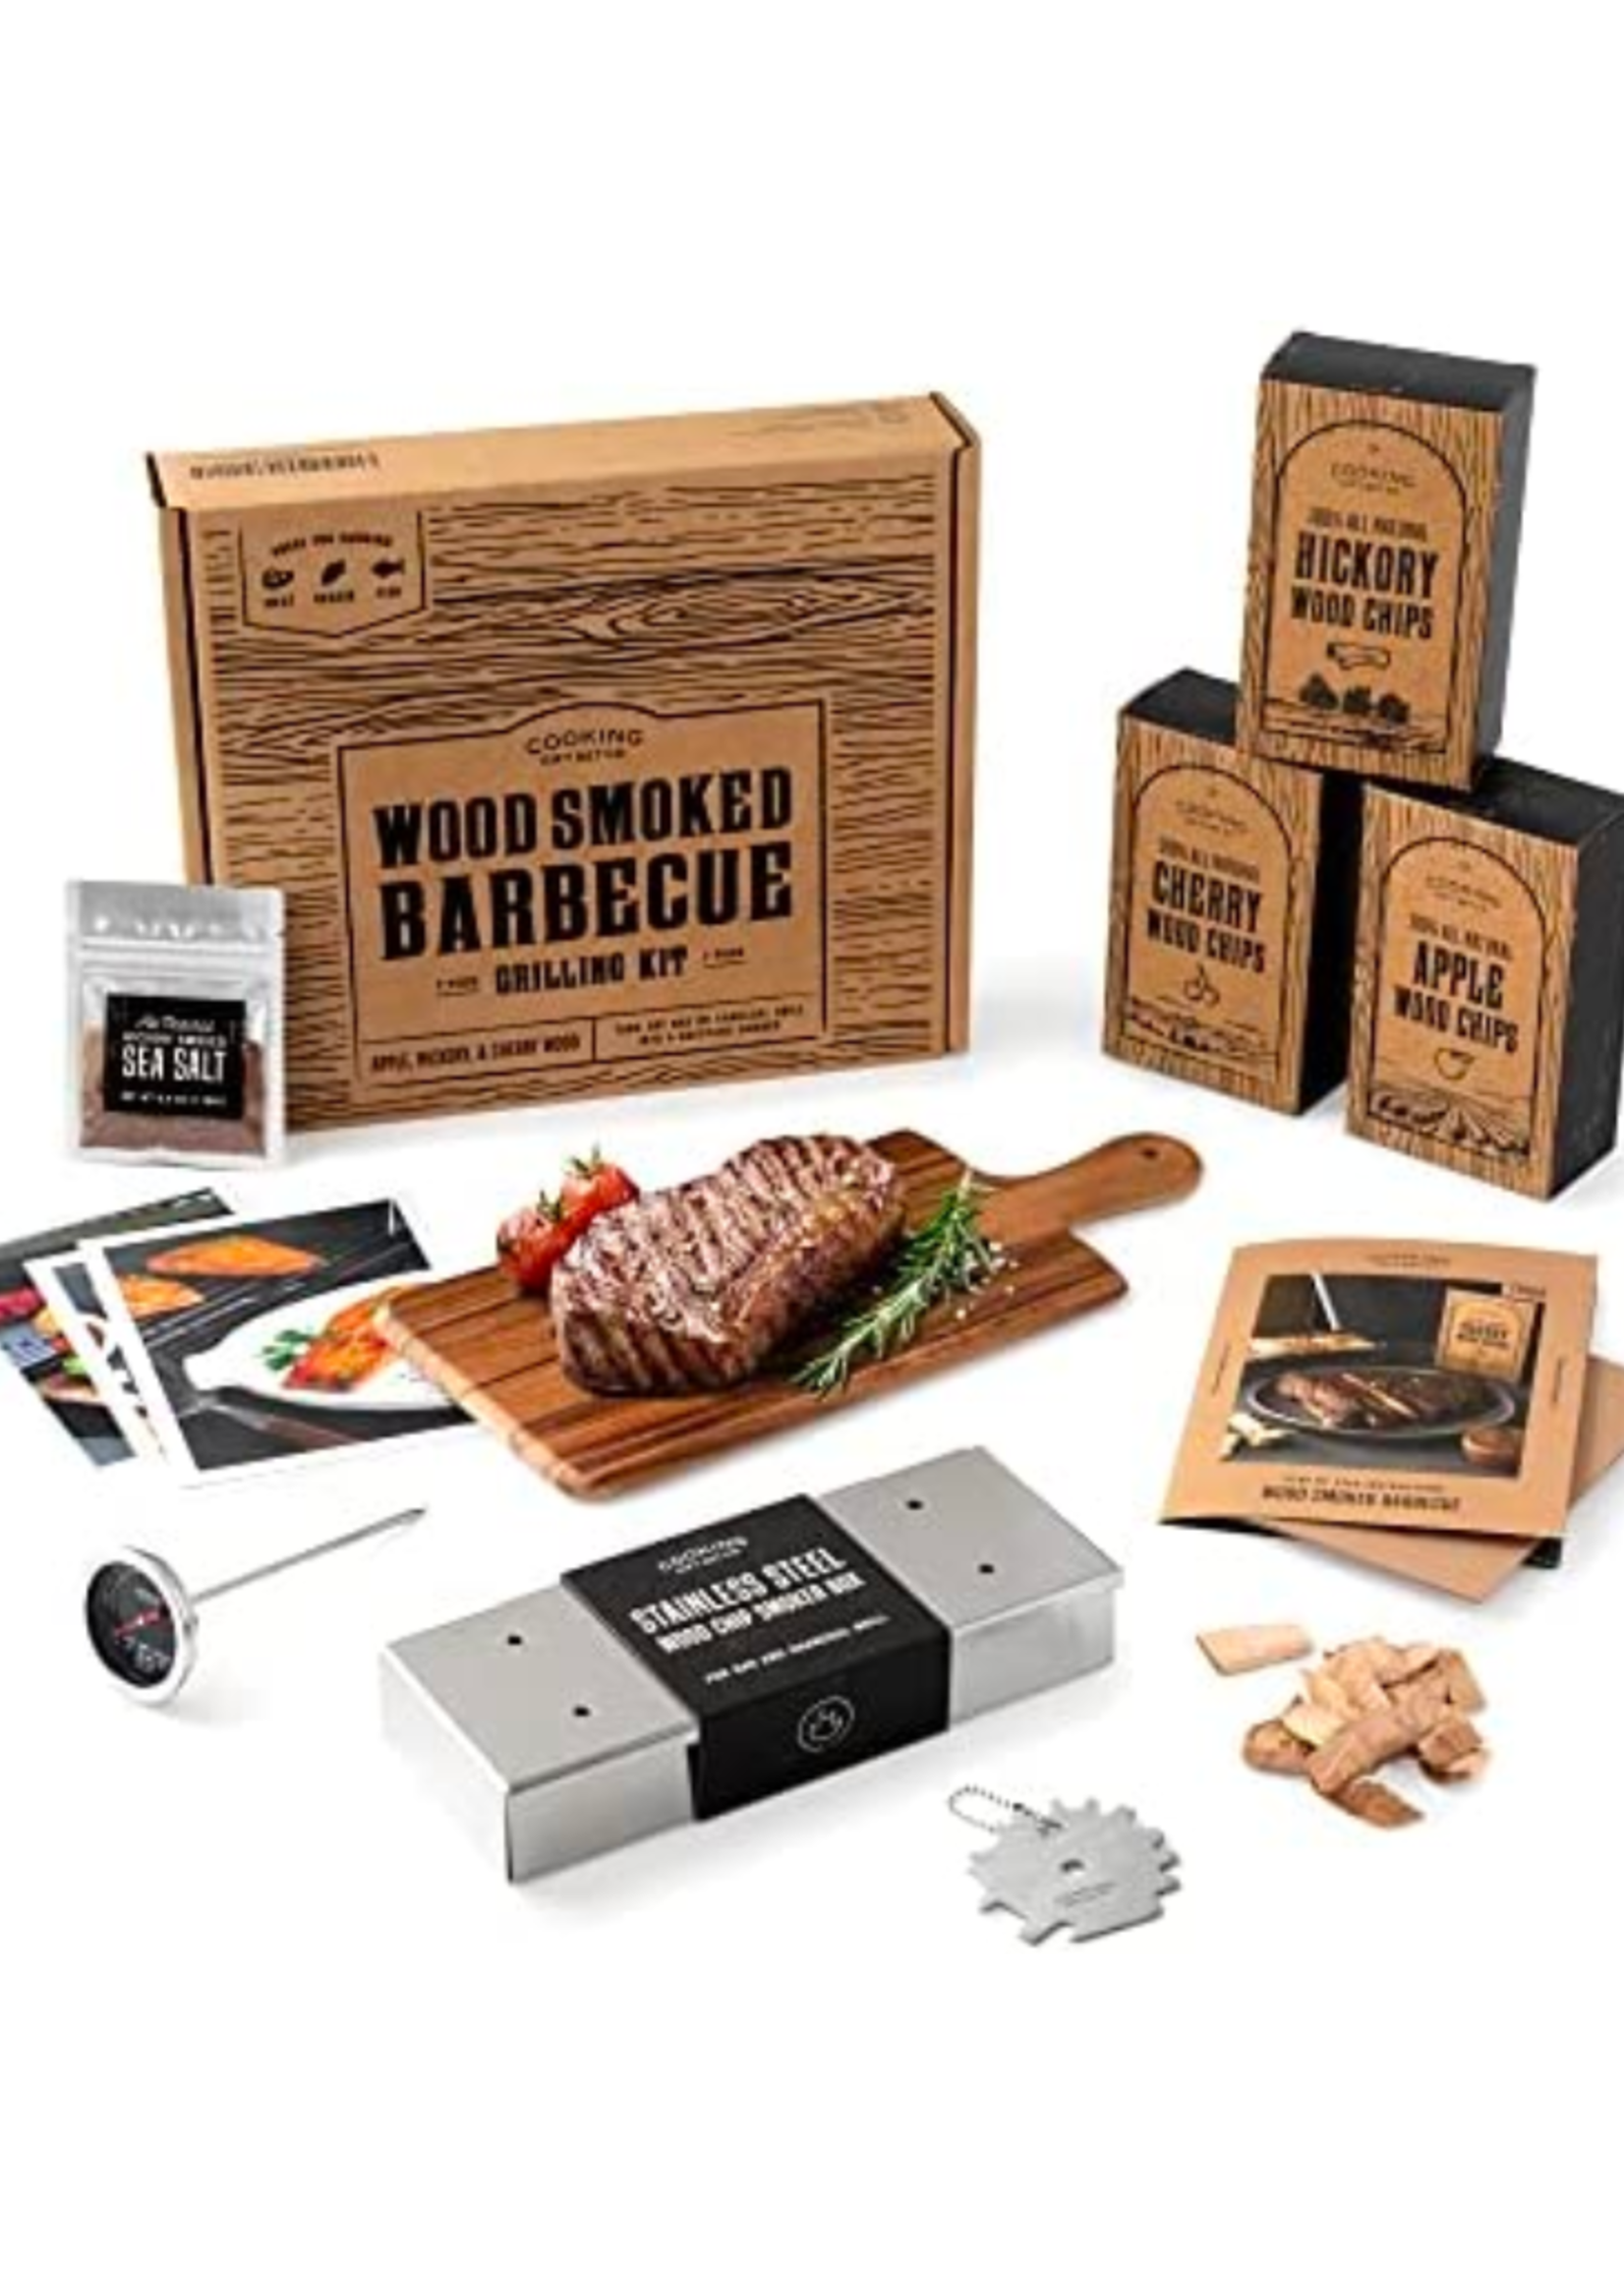 Cooking Gift Set Co.  Wood Smoked Barbecue Kit